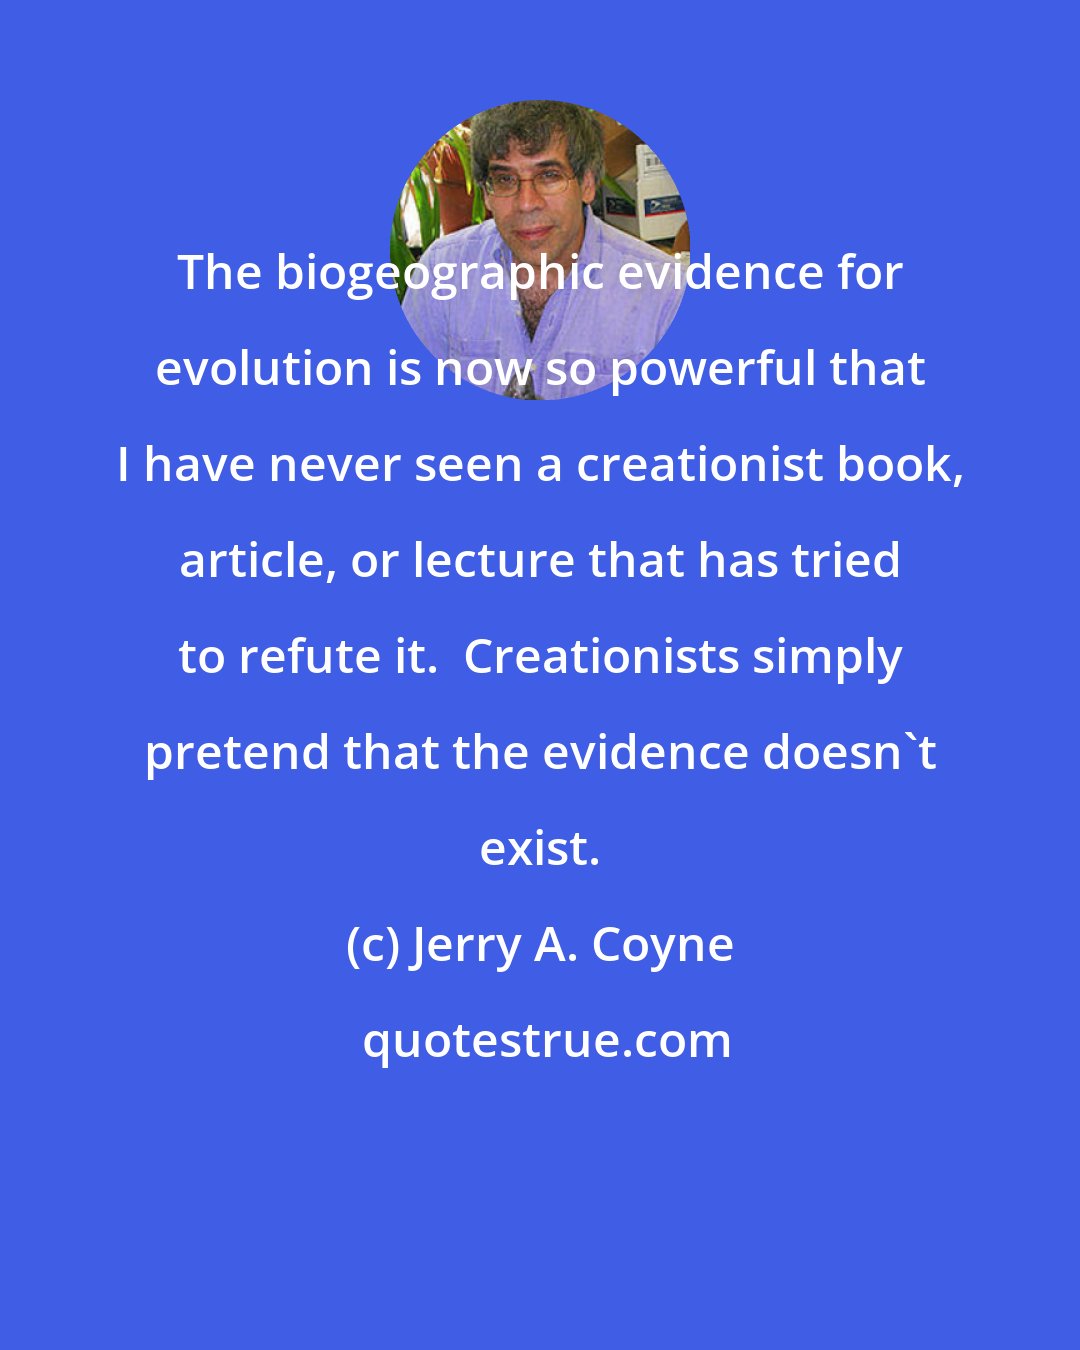 Jerry A. Coyne: The biogeographic evidence for evolution is now so powerful that I have never seen a creationist book, article, or lecture that has tried to refute it.  Creationists simply pretend that the evidence doesn't exist.